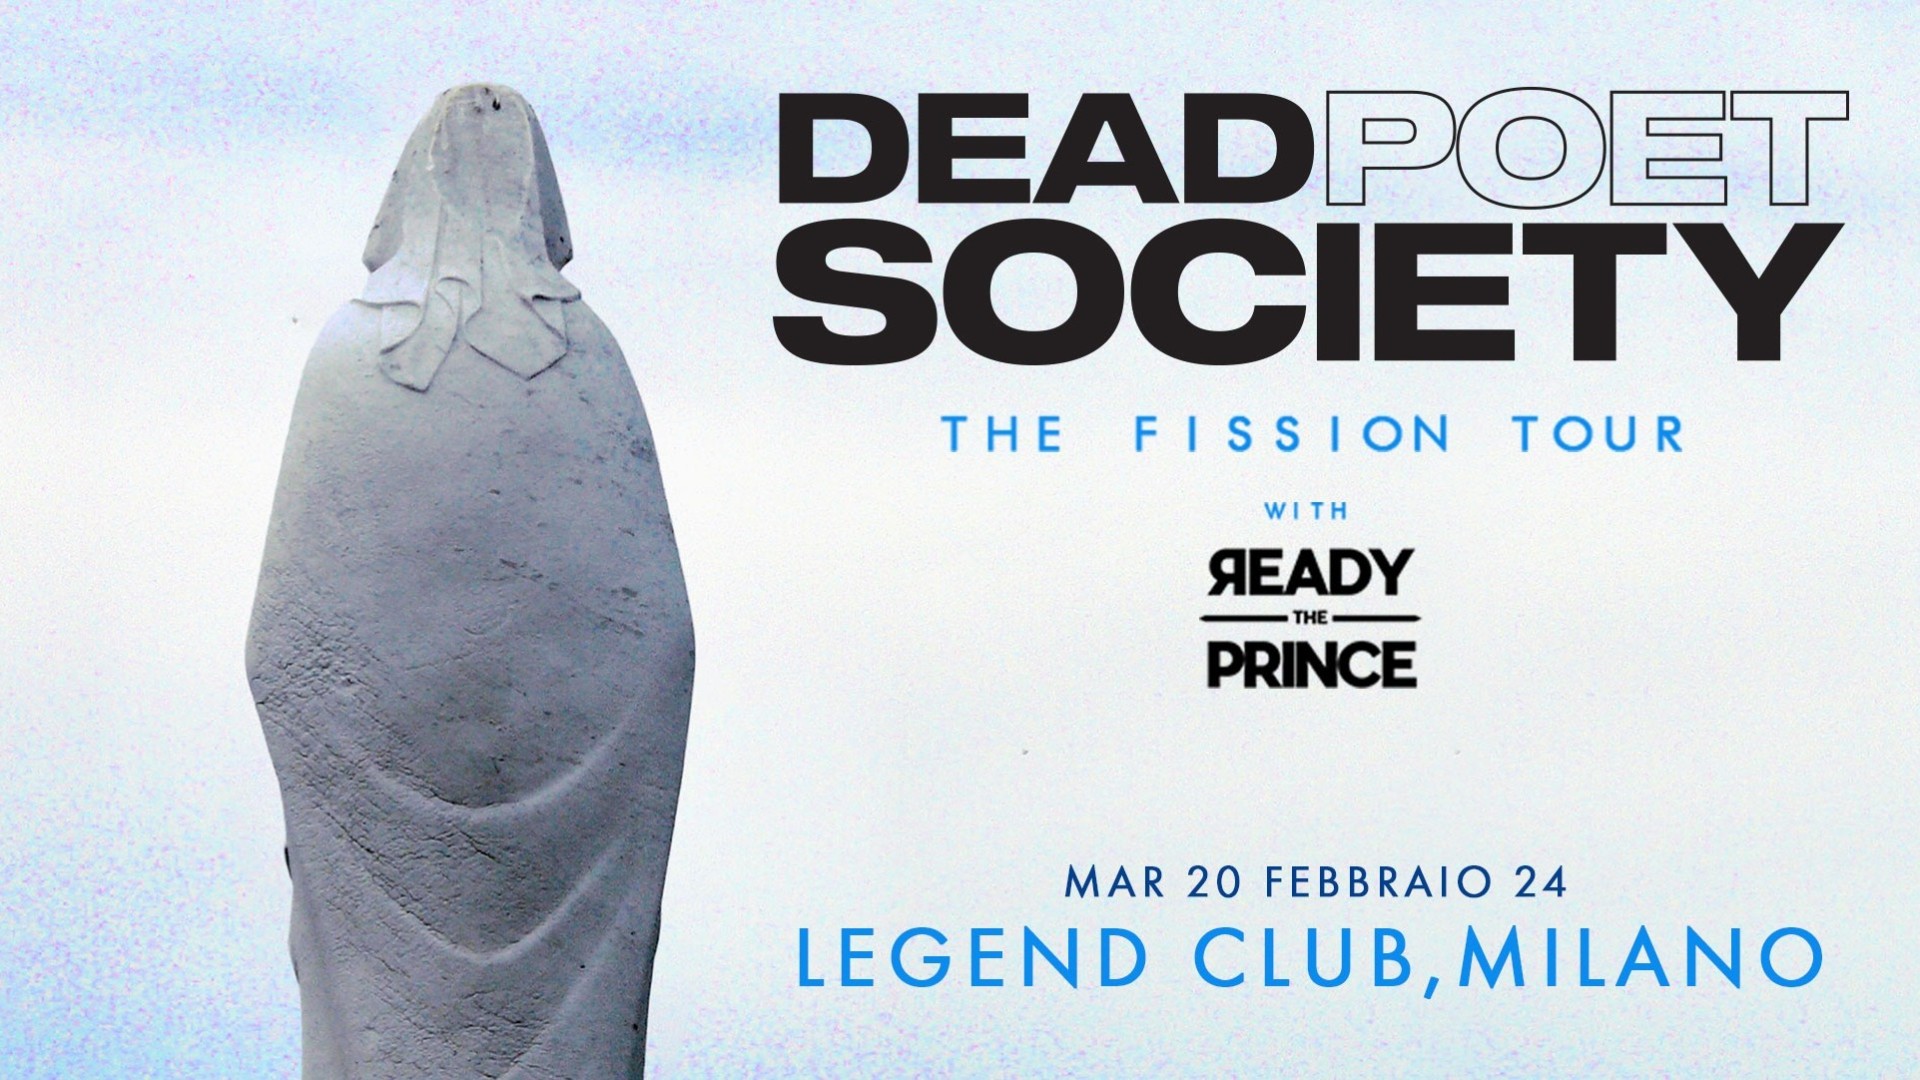 Dead Poet Society “The Fission Tour”